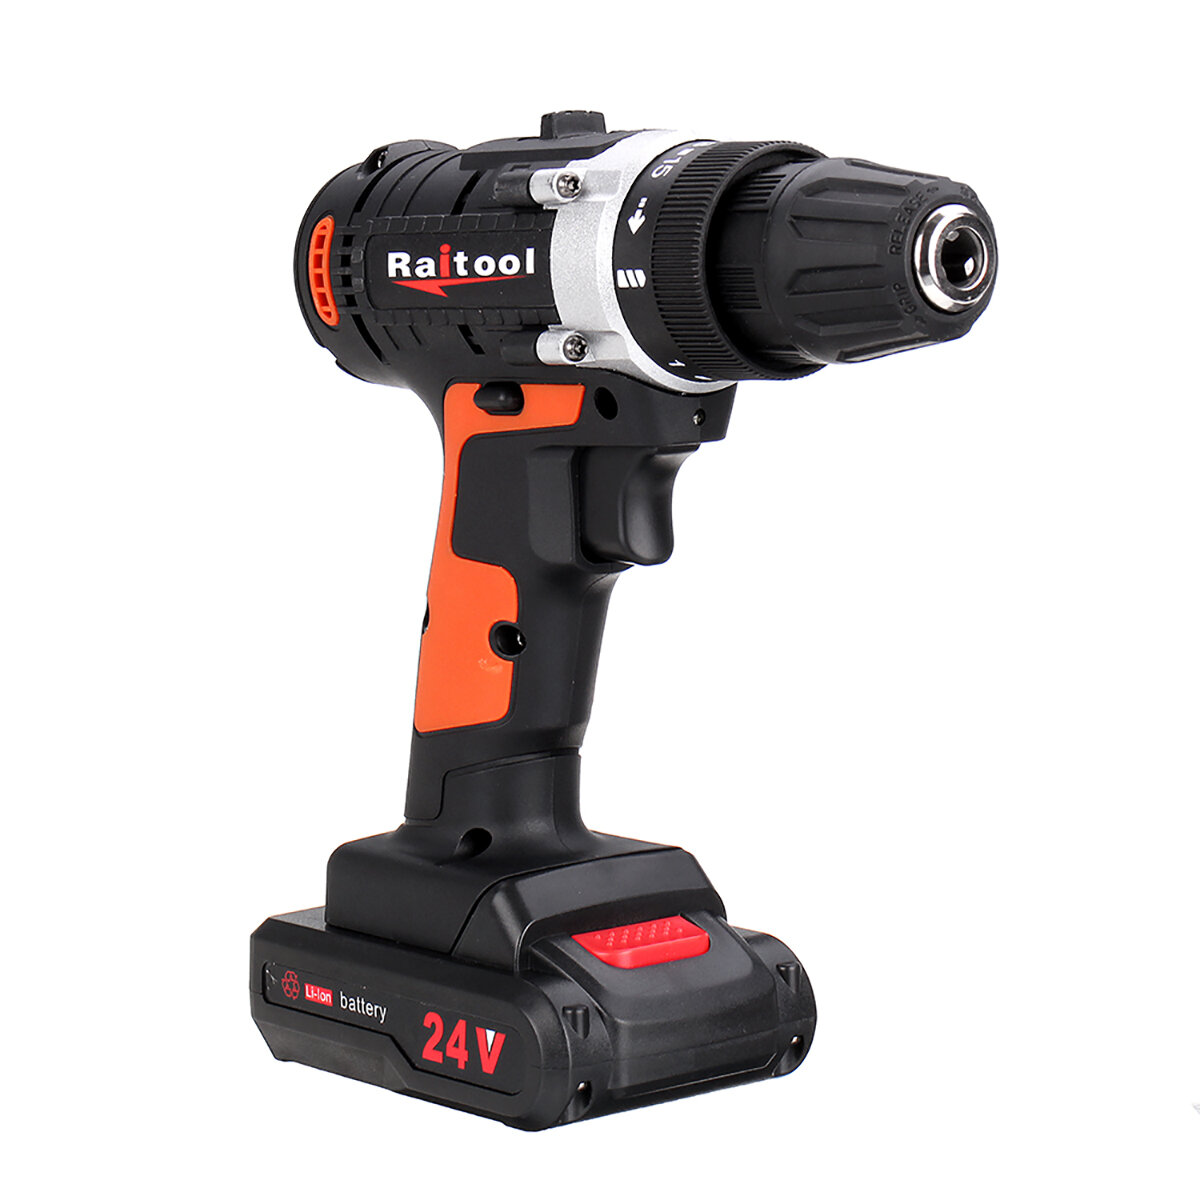 Raitool 12V/24V Lithium Battery Power Drill Cordless Rechargeable 2 Speed Electric Drill